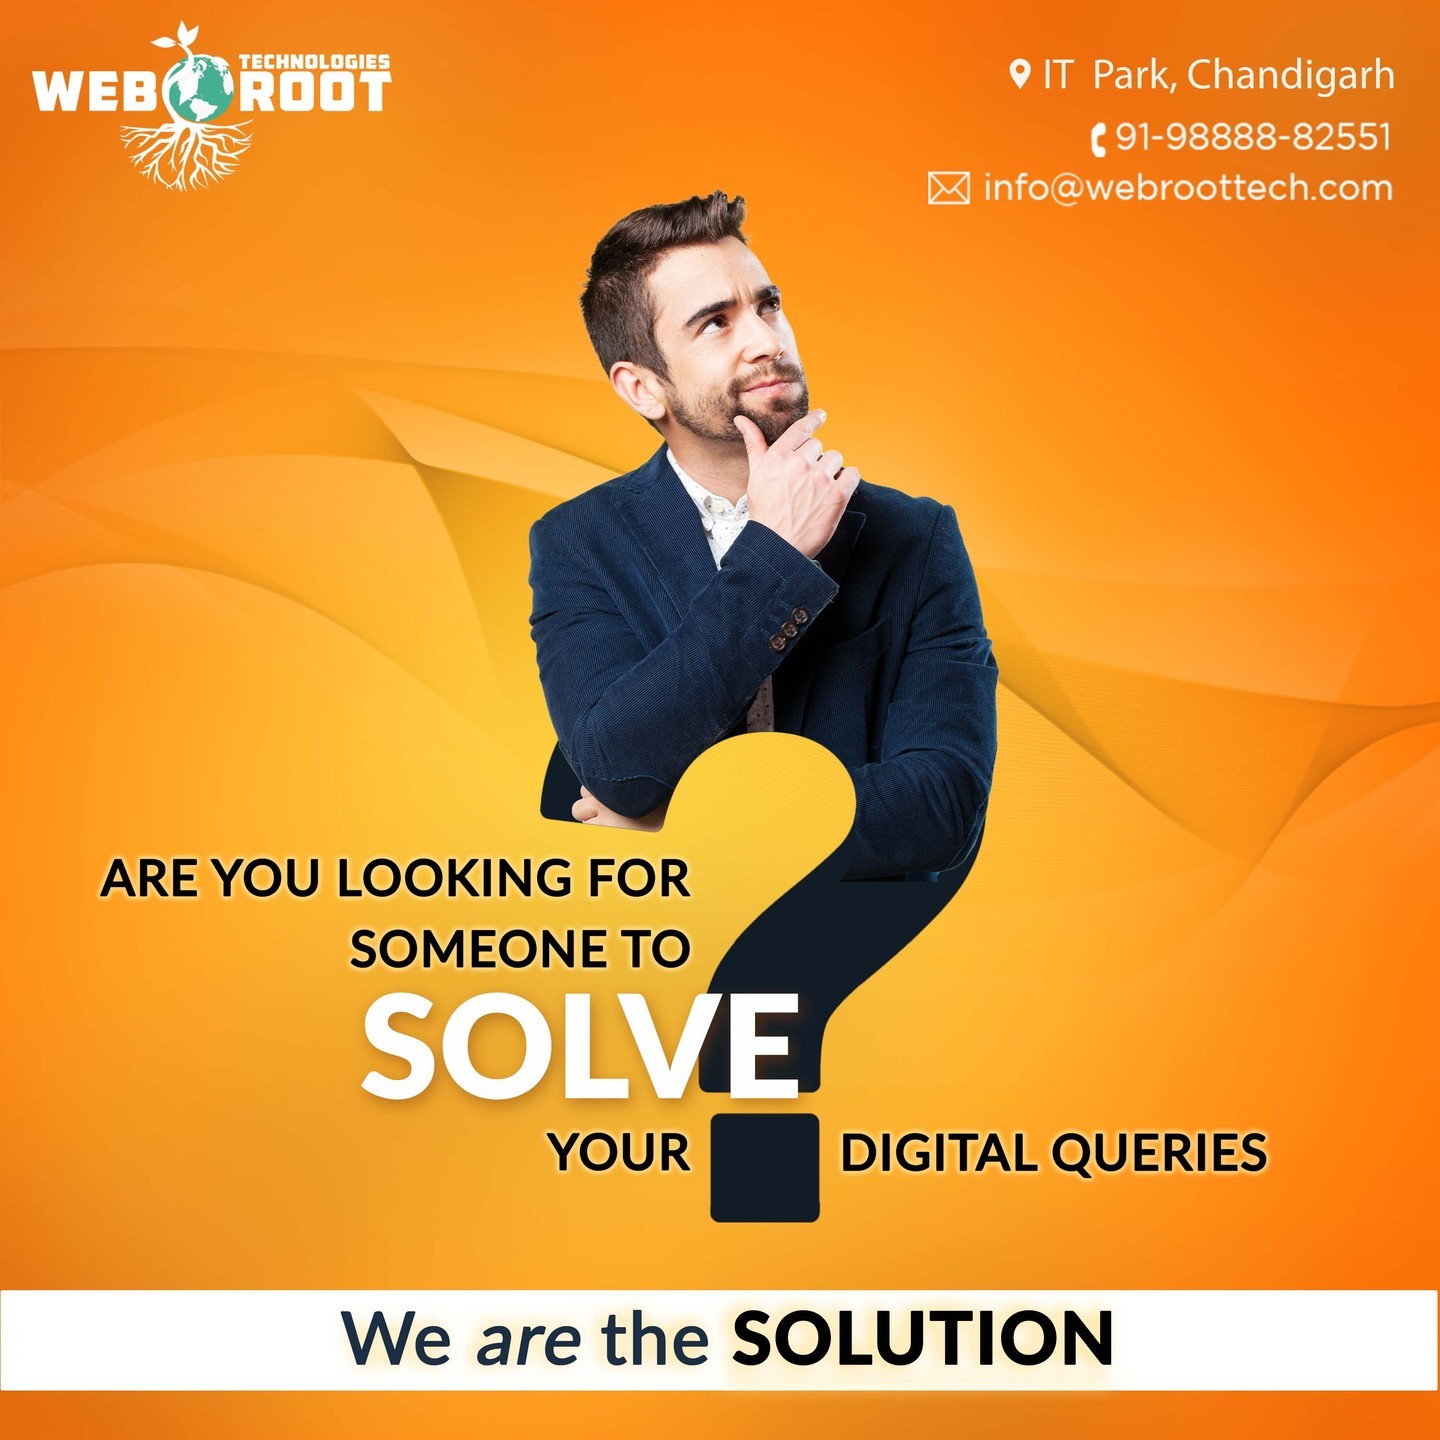 Do you require assistance with your digital queries? Wondering how a website works, which framework is best for development, how to choose a marketing niche, and how these digital developments affect your organization. The list of endless questions goes on, isn't it?

All of your queries will be answered by Webroot. Call right now to talk about your project! Let's walk together towards the path of conversions & measurable results.

Get a Quote!
Contact Us:⠀⠀⠀⠀
📞 9888882551⠀⠀⠀⠀
: info@webroottech.com⠀⠀⠀⠀
Website: https://buff.ly/3LcR0Tk

#digitalquerymedia #digitalmarketing #marketing #socialmediamarketing #socialmedia #business #seo #branding #marketingdigital #onlinemarketing #entrepreneur #instagram #advertising #contentmarketing #marketingstrategy #digitalmarketingagency #digital #marketingtips #smallbusiness #webdesign #graphicdesign #design #digitalmarketingtips #website #marketingagency #startup #motivation #success #webroottech
#digitalmarketingqueries